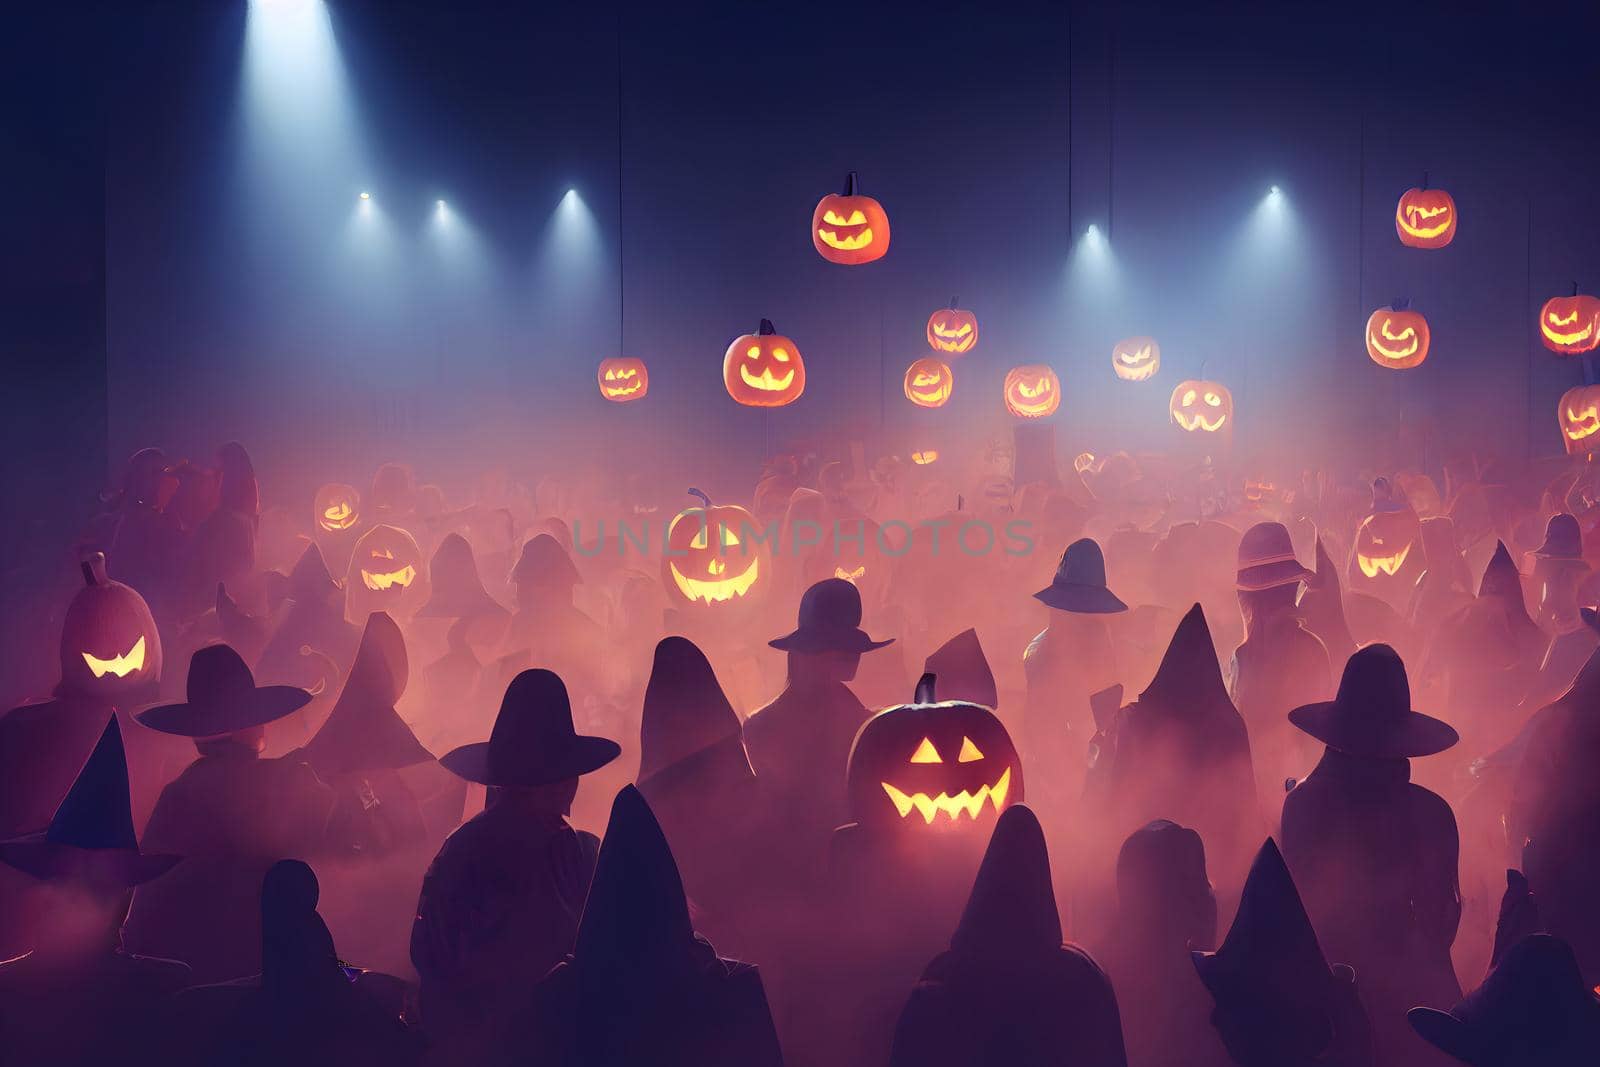 massive halloween party with many unrecognizable costumed people dancing in foggy environment, neural network generated image. by z1b